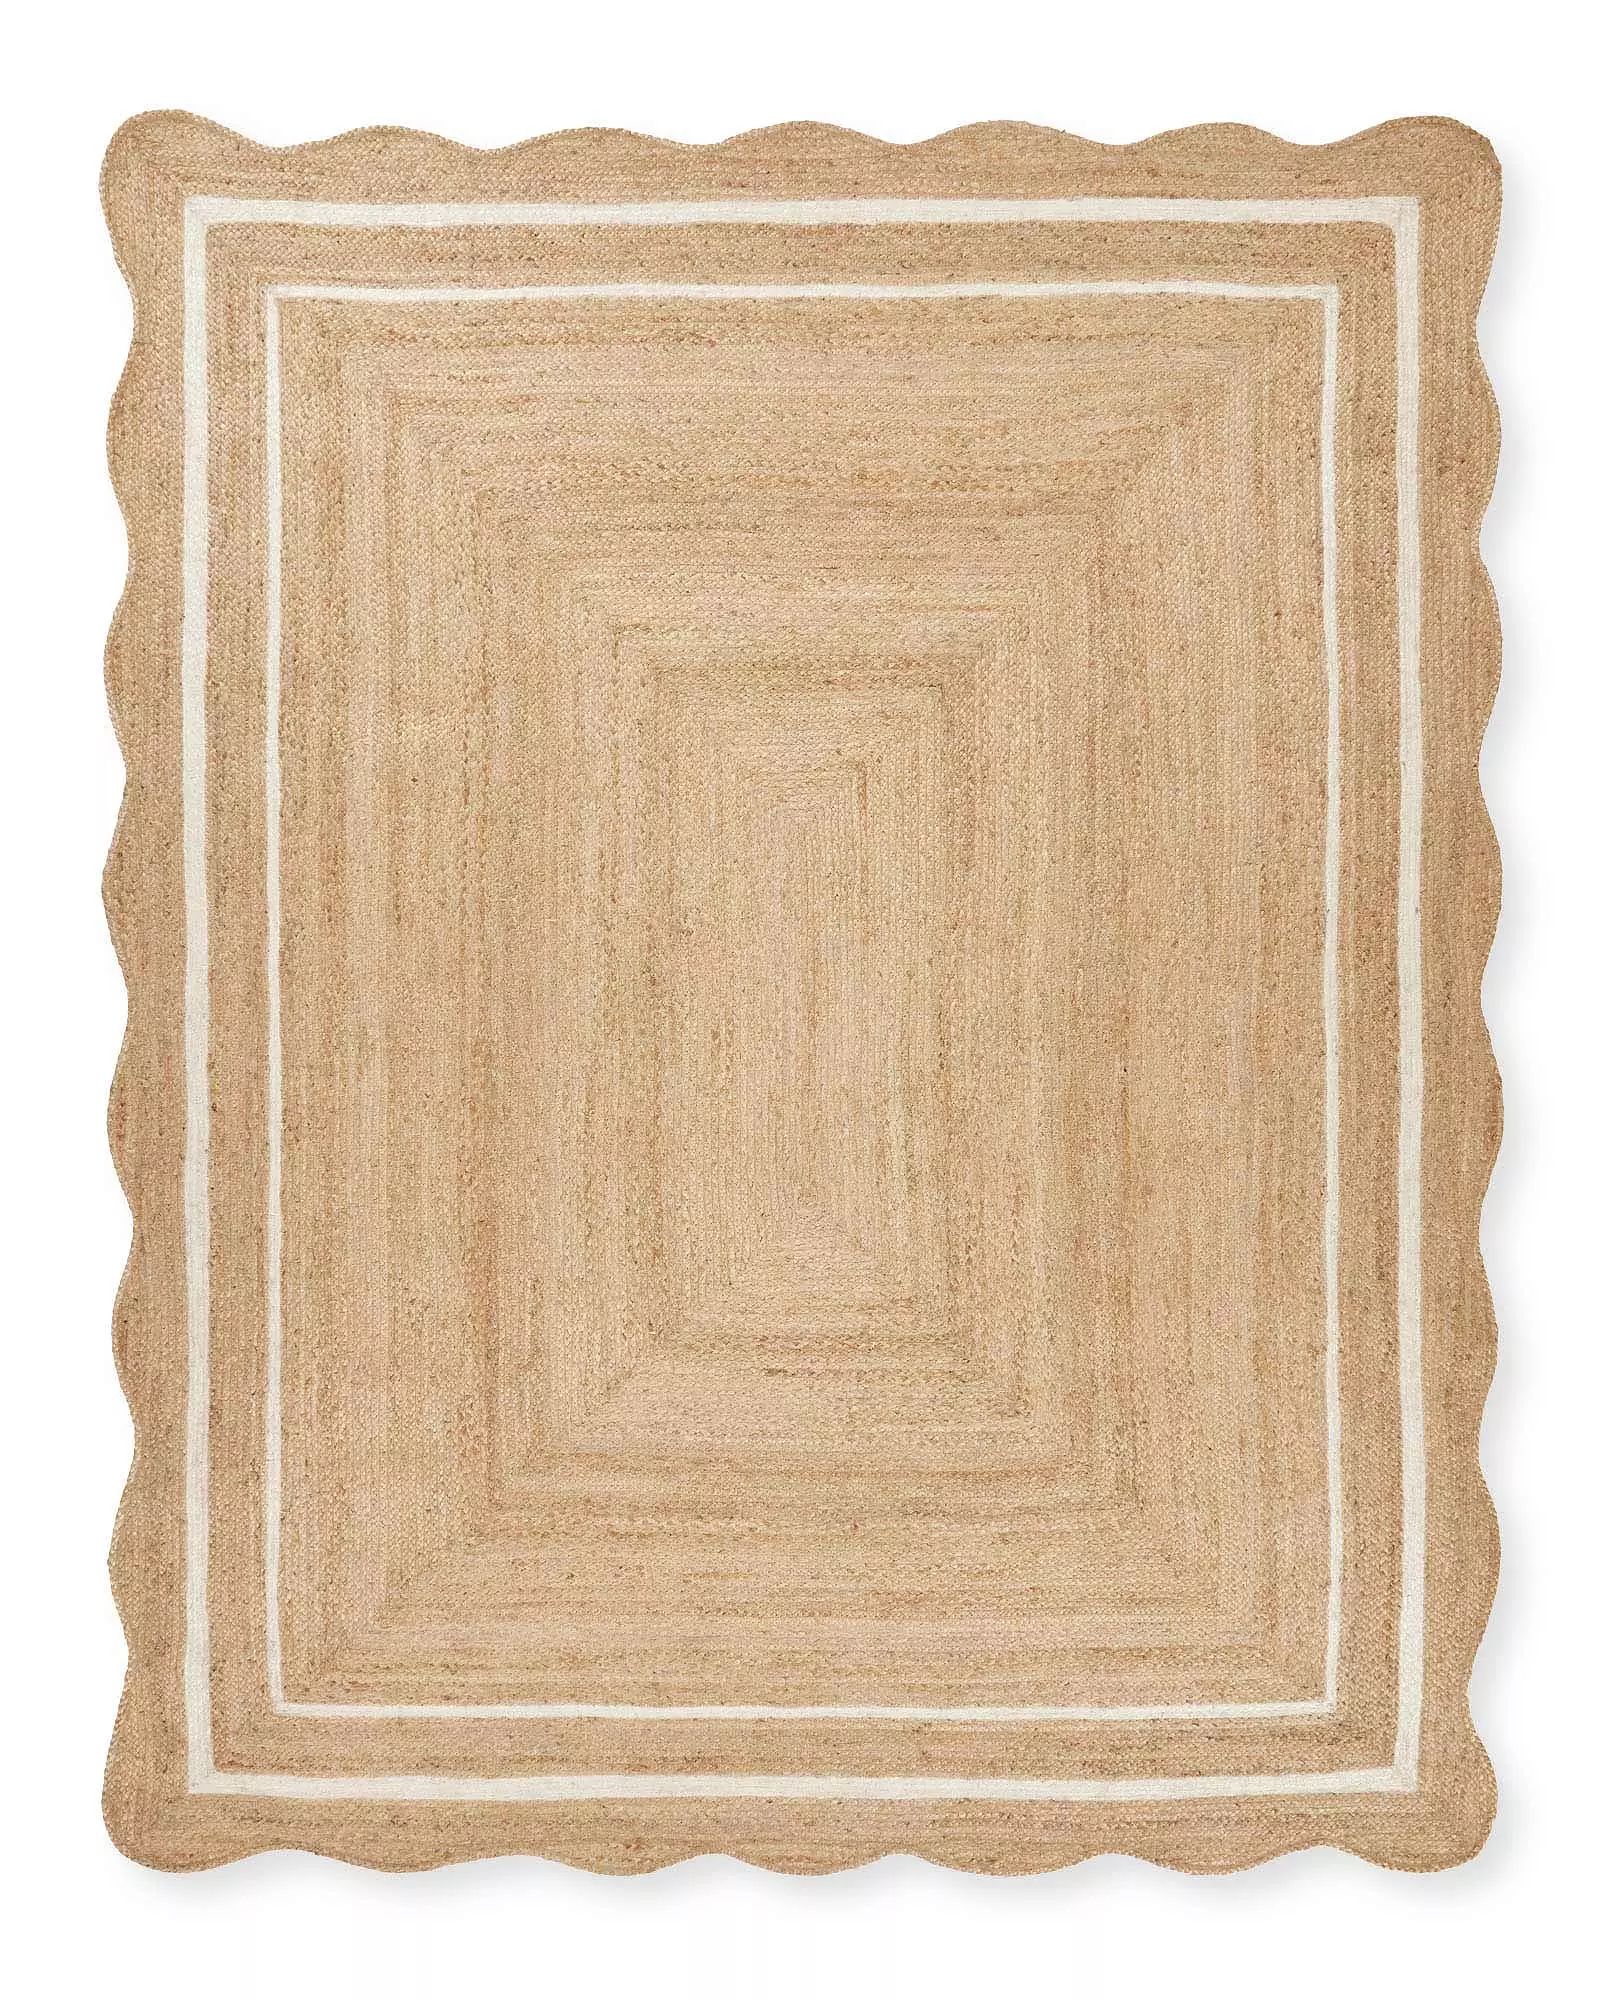 Scallop Jute Rug | Serena and Lily